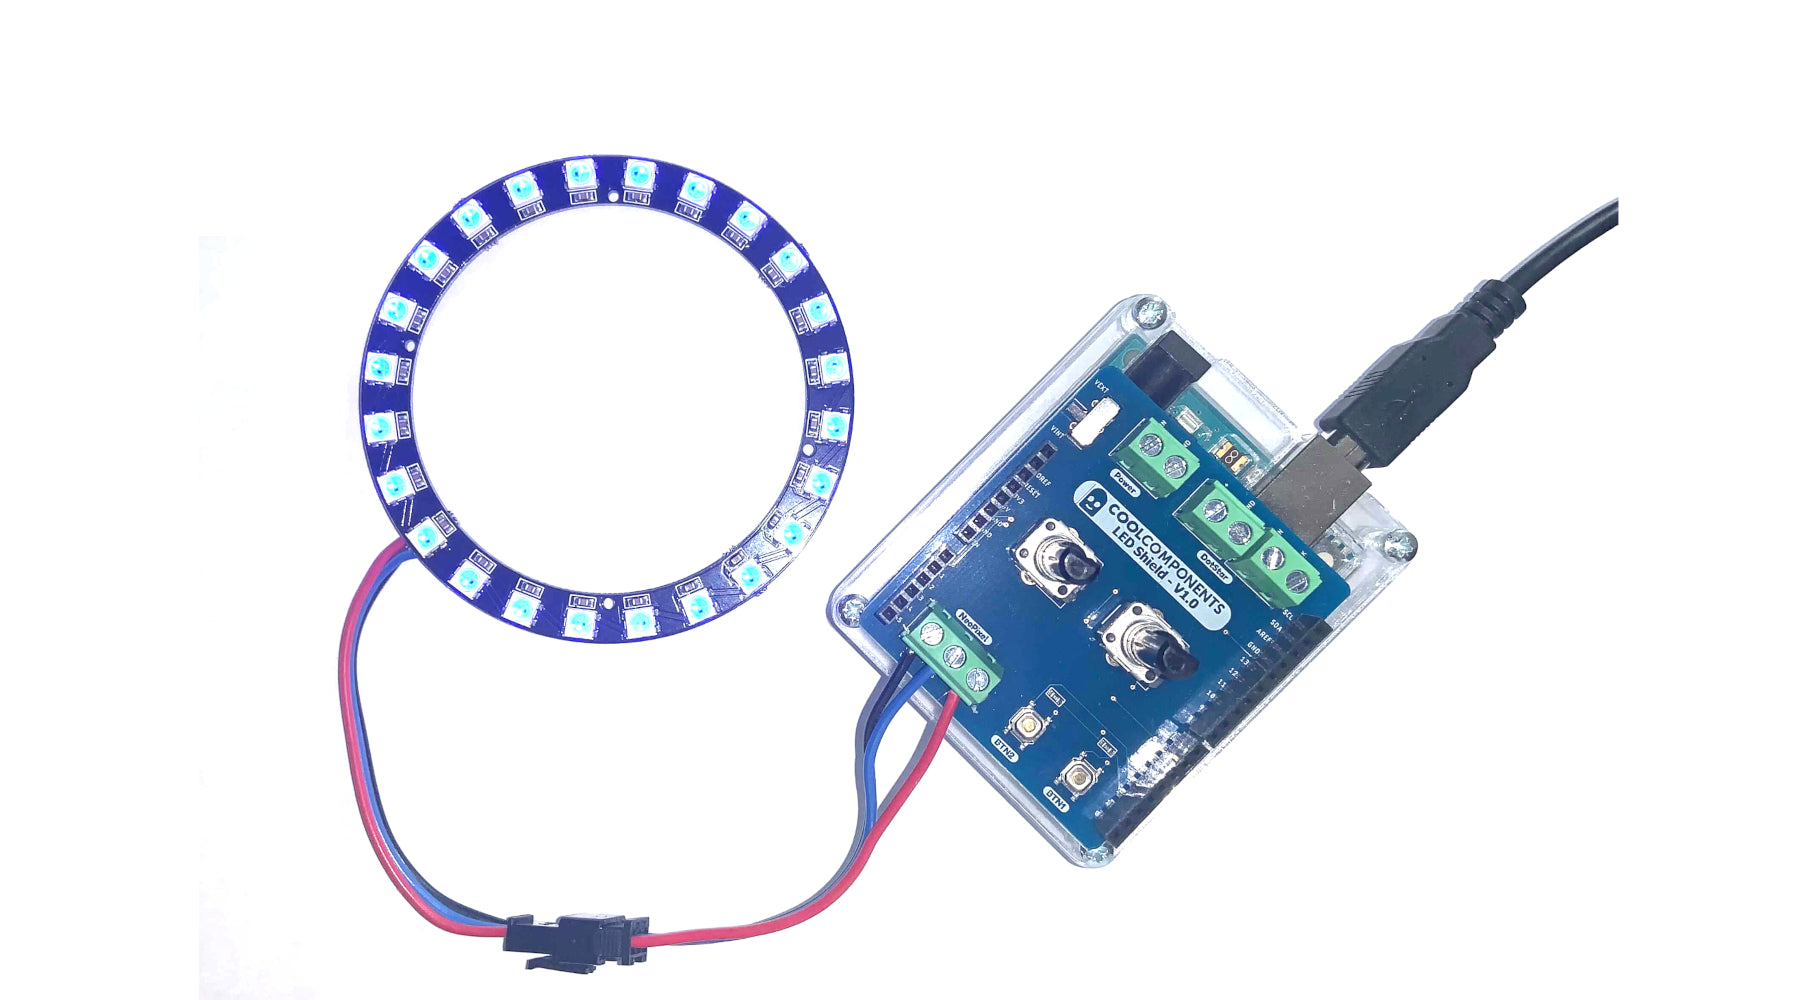 LED Shield Guide & Example Code